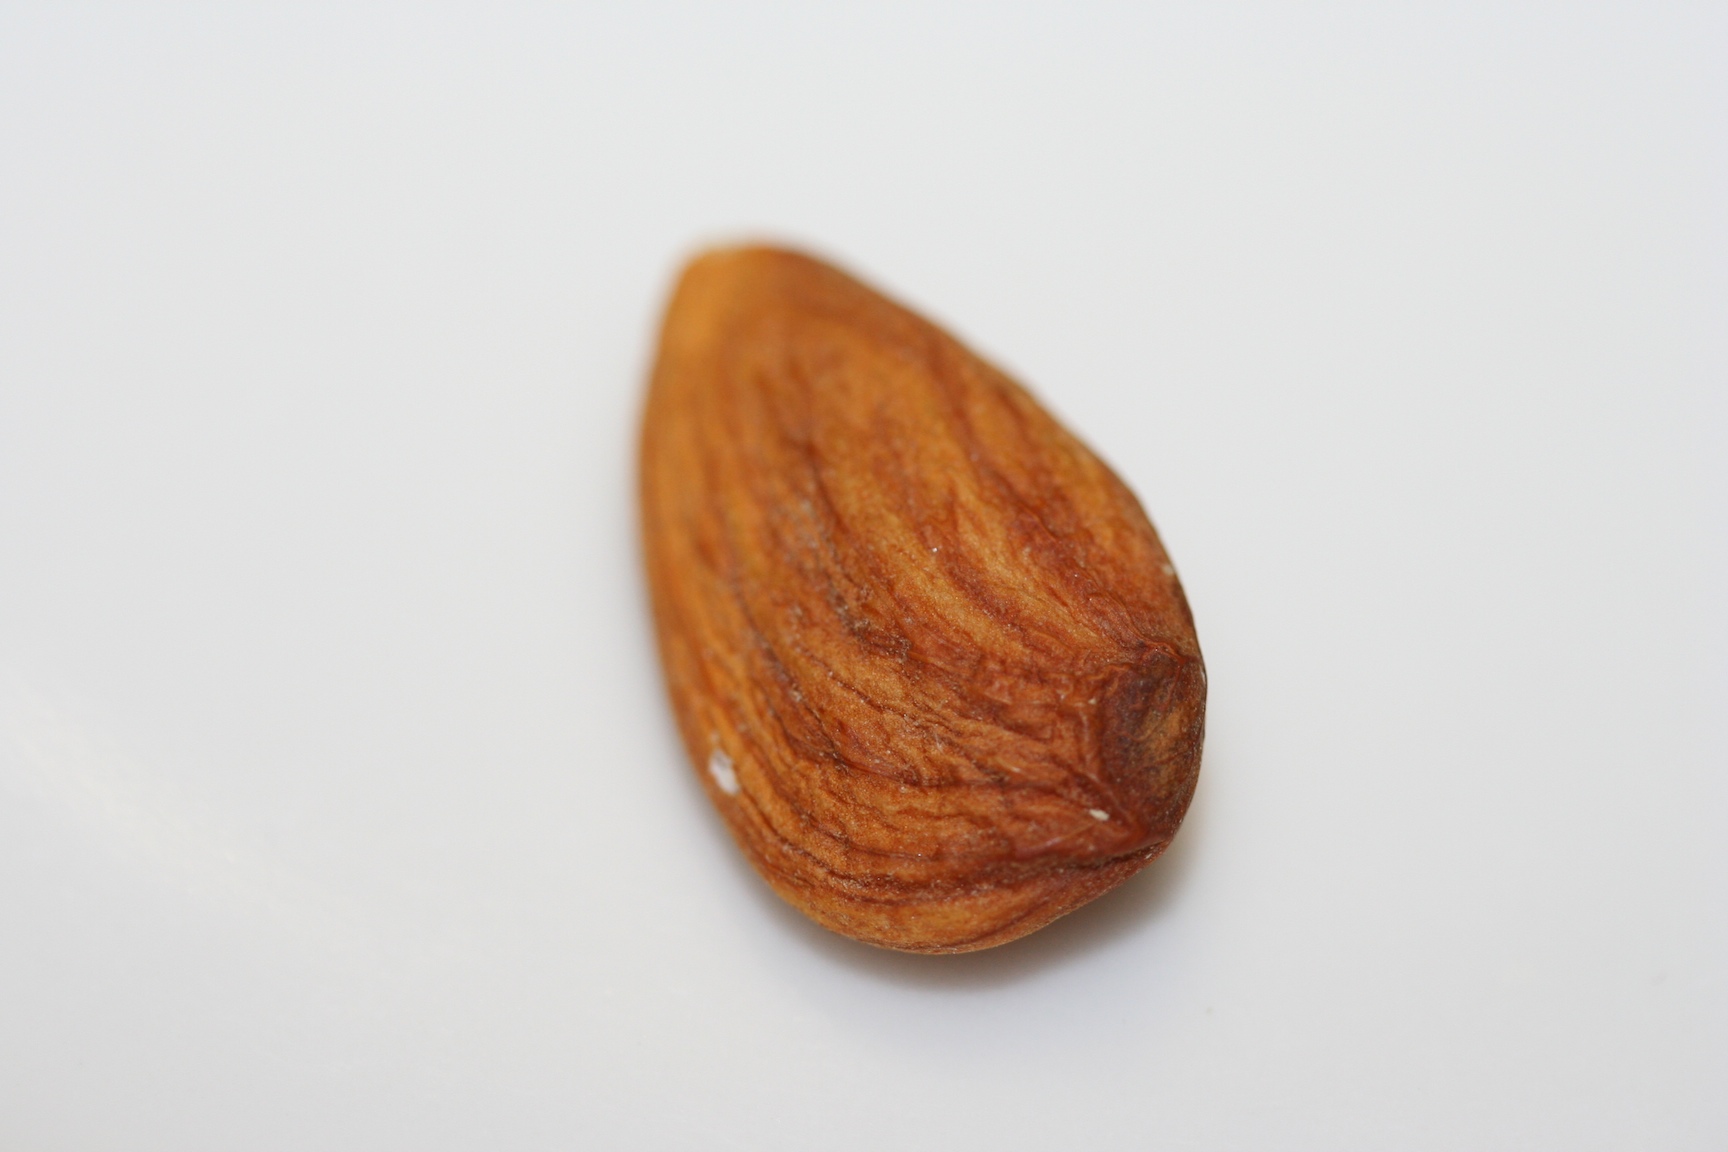 Image of an almond